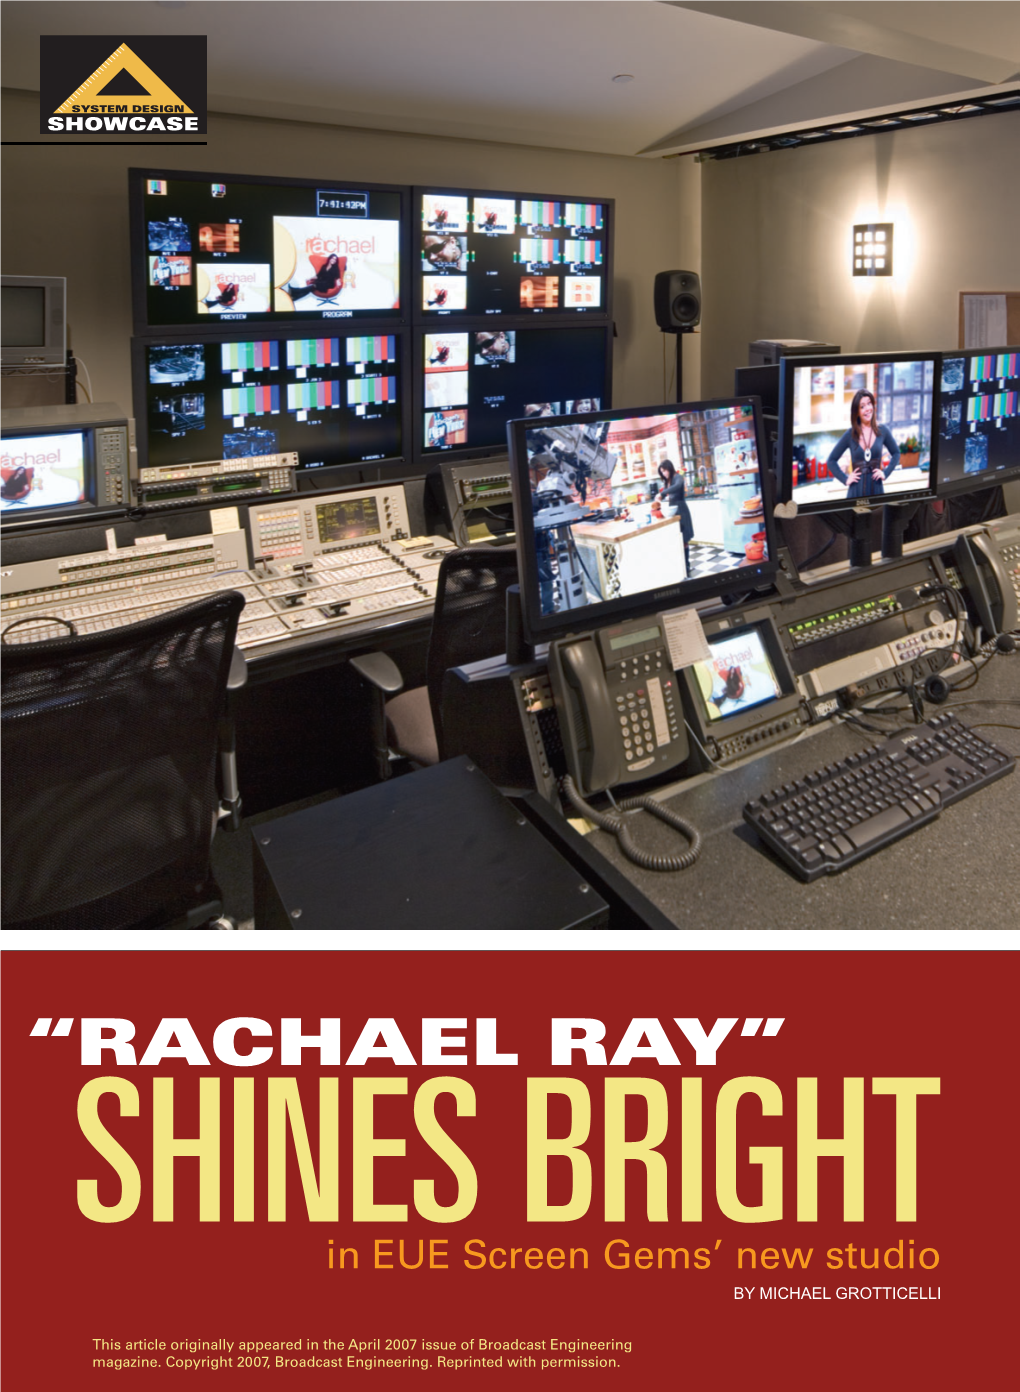 “RACHAEL RAY” SHINES BRIGHT in EUE Screen Gems’ New Studio by MICHAEL GROTTICELLI